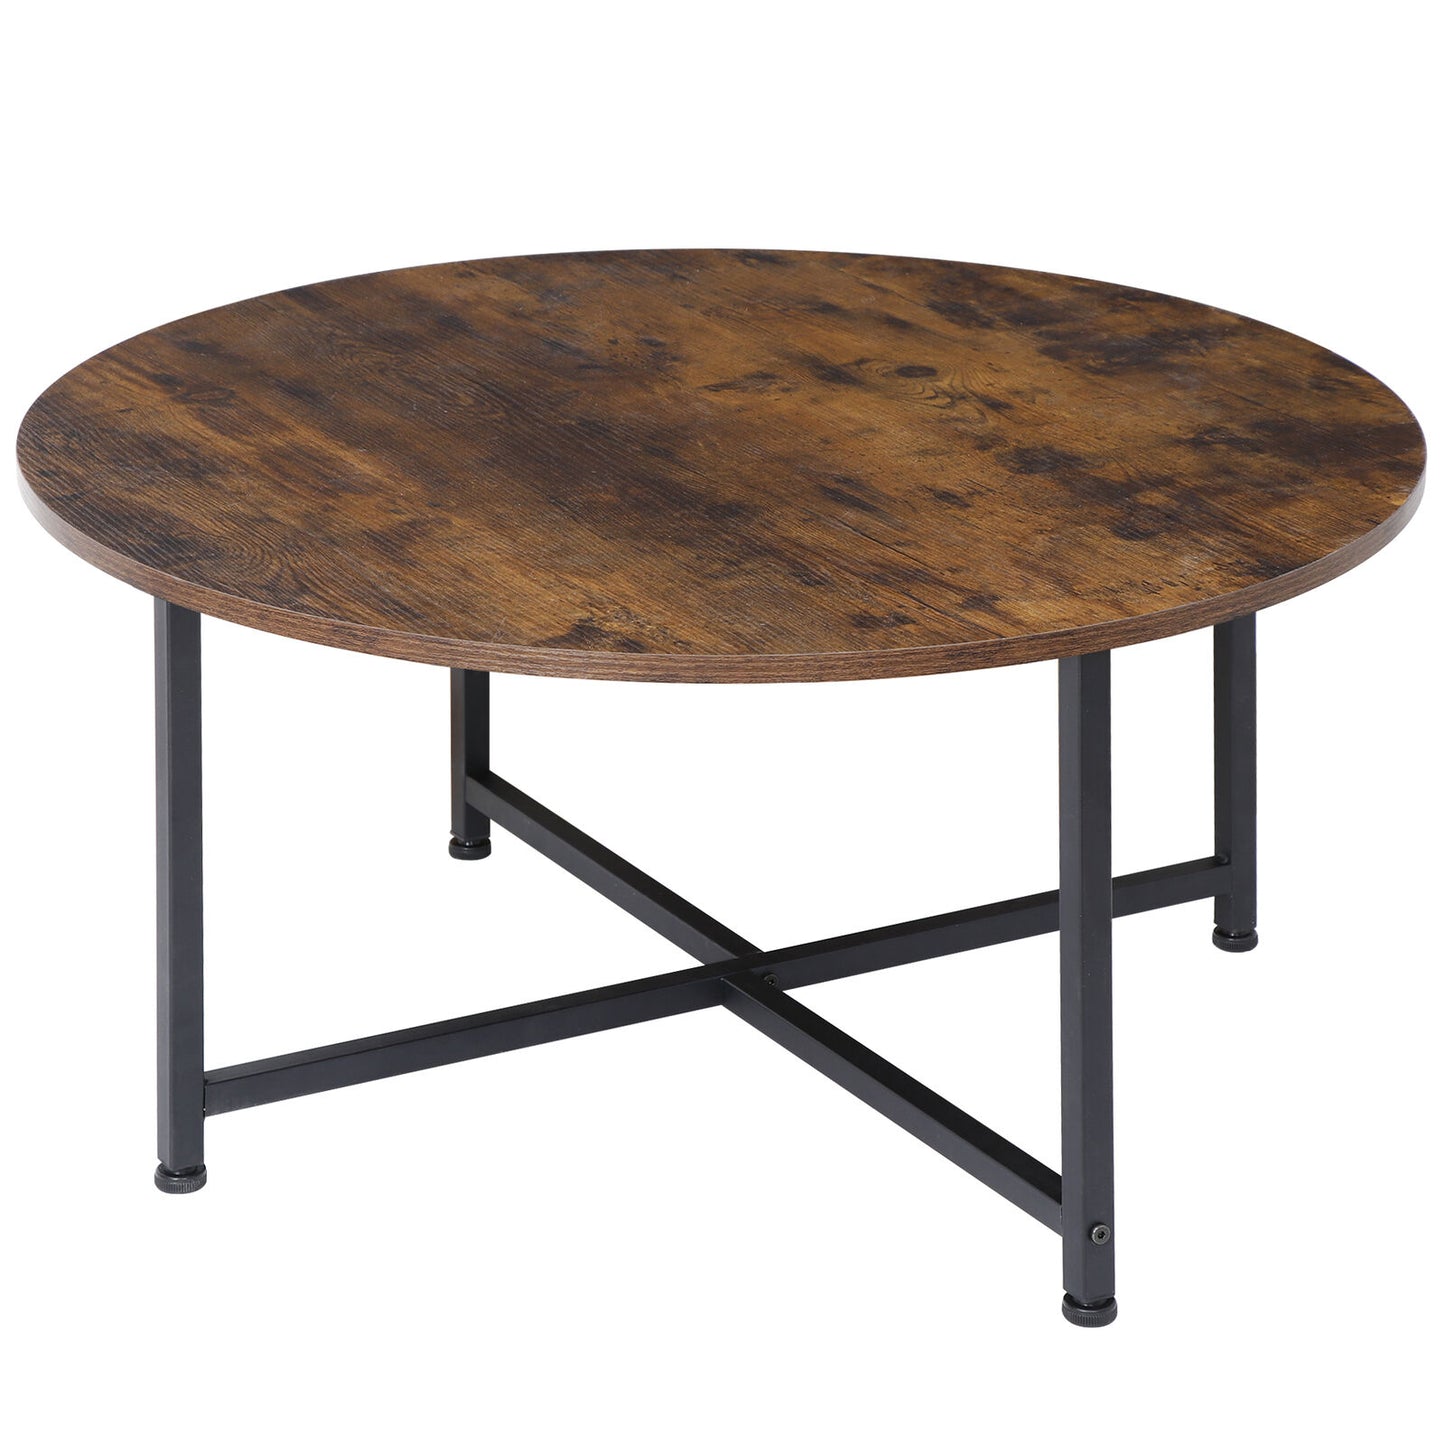 Round Coffee Table Kitchen Dining Table Modern Leisure Tea Table Office Brown